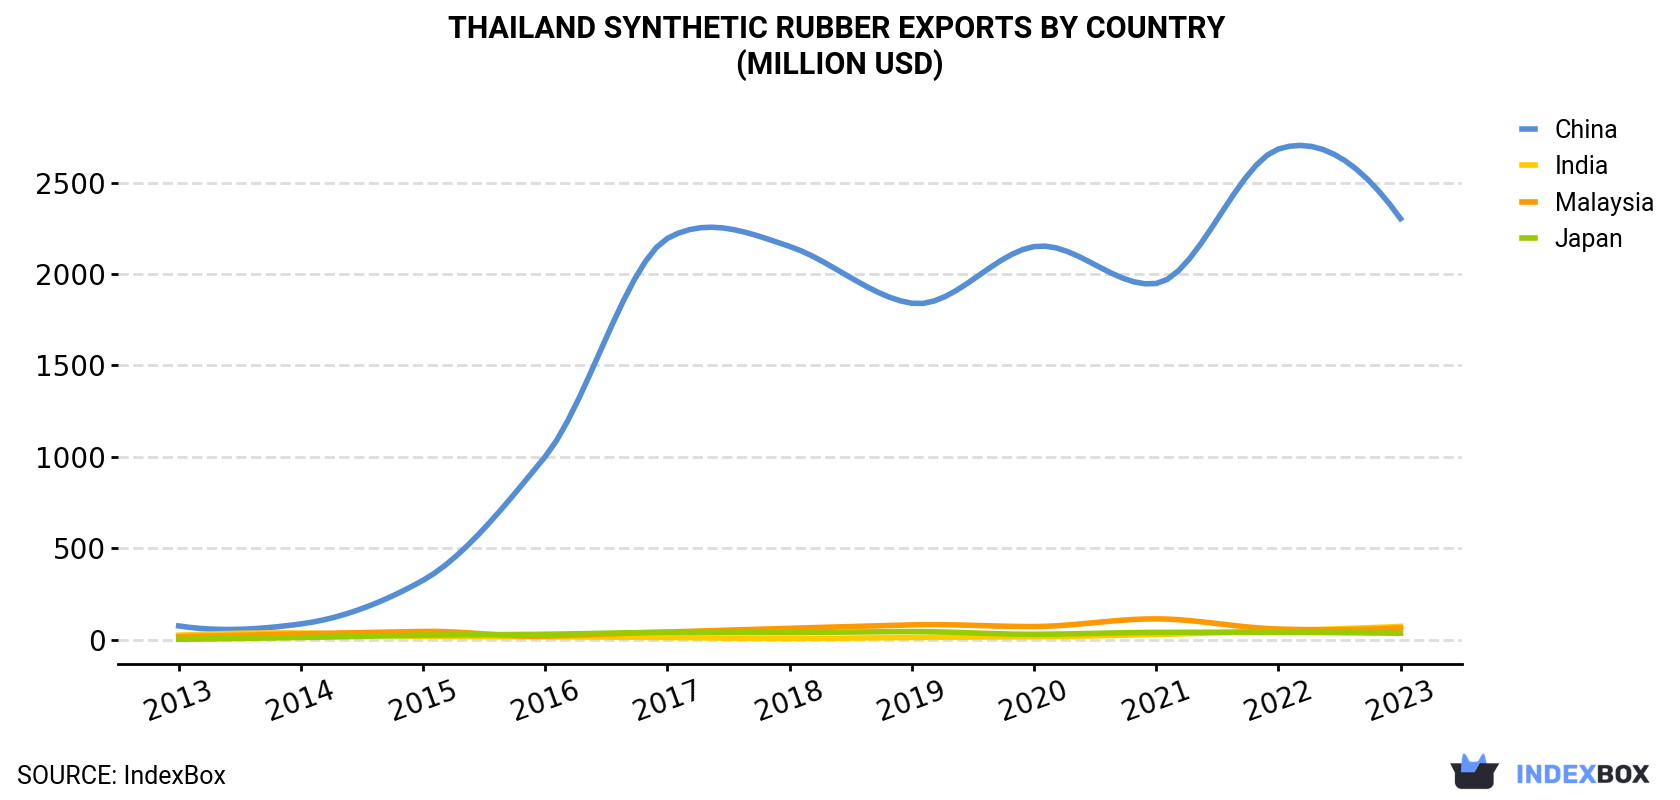 Thailand Synthetic Rubber Exports By Country (Million USD)